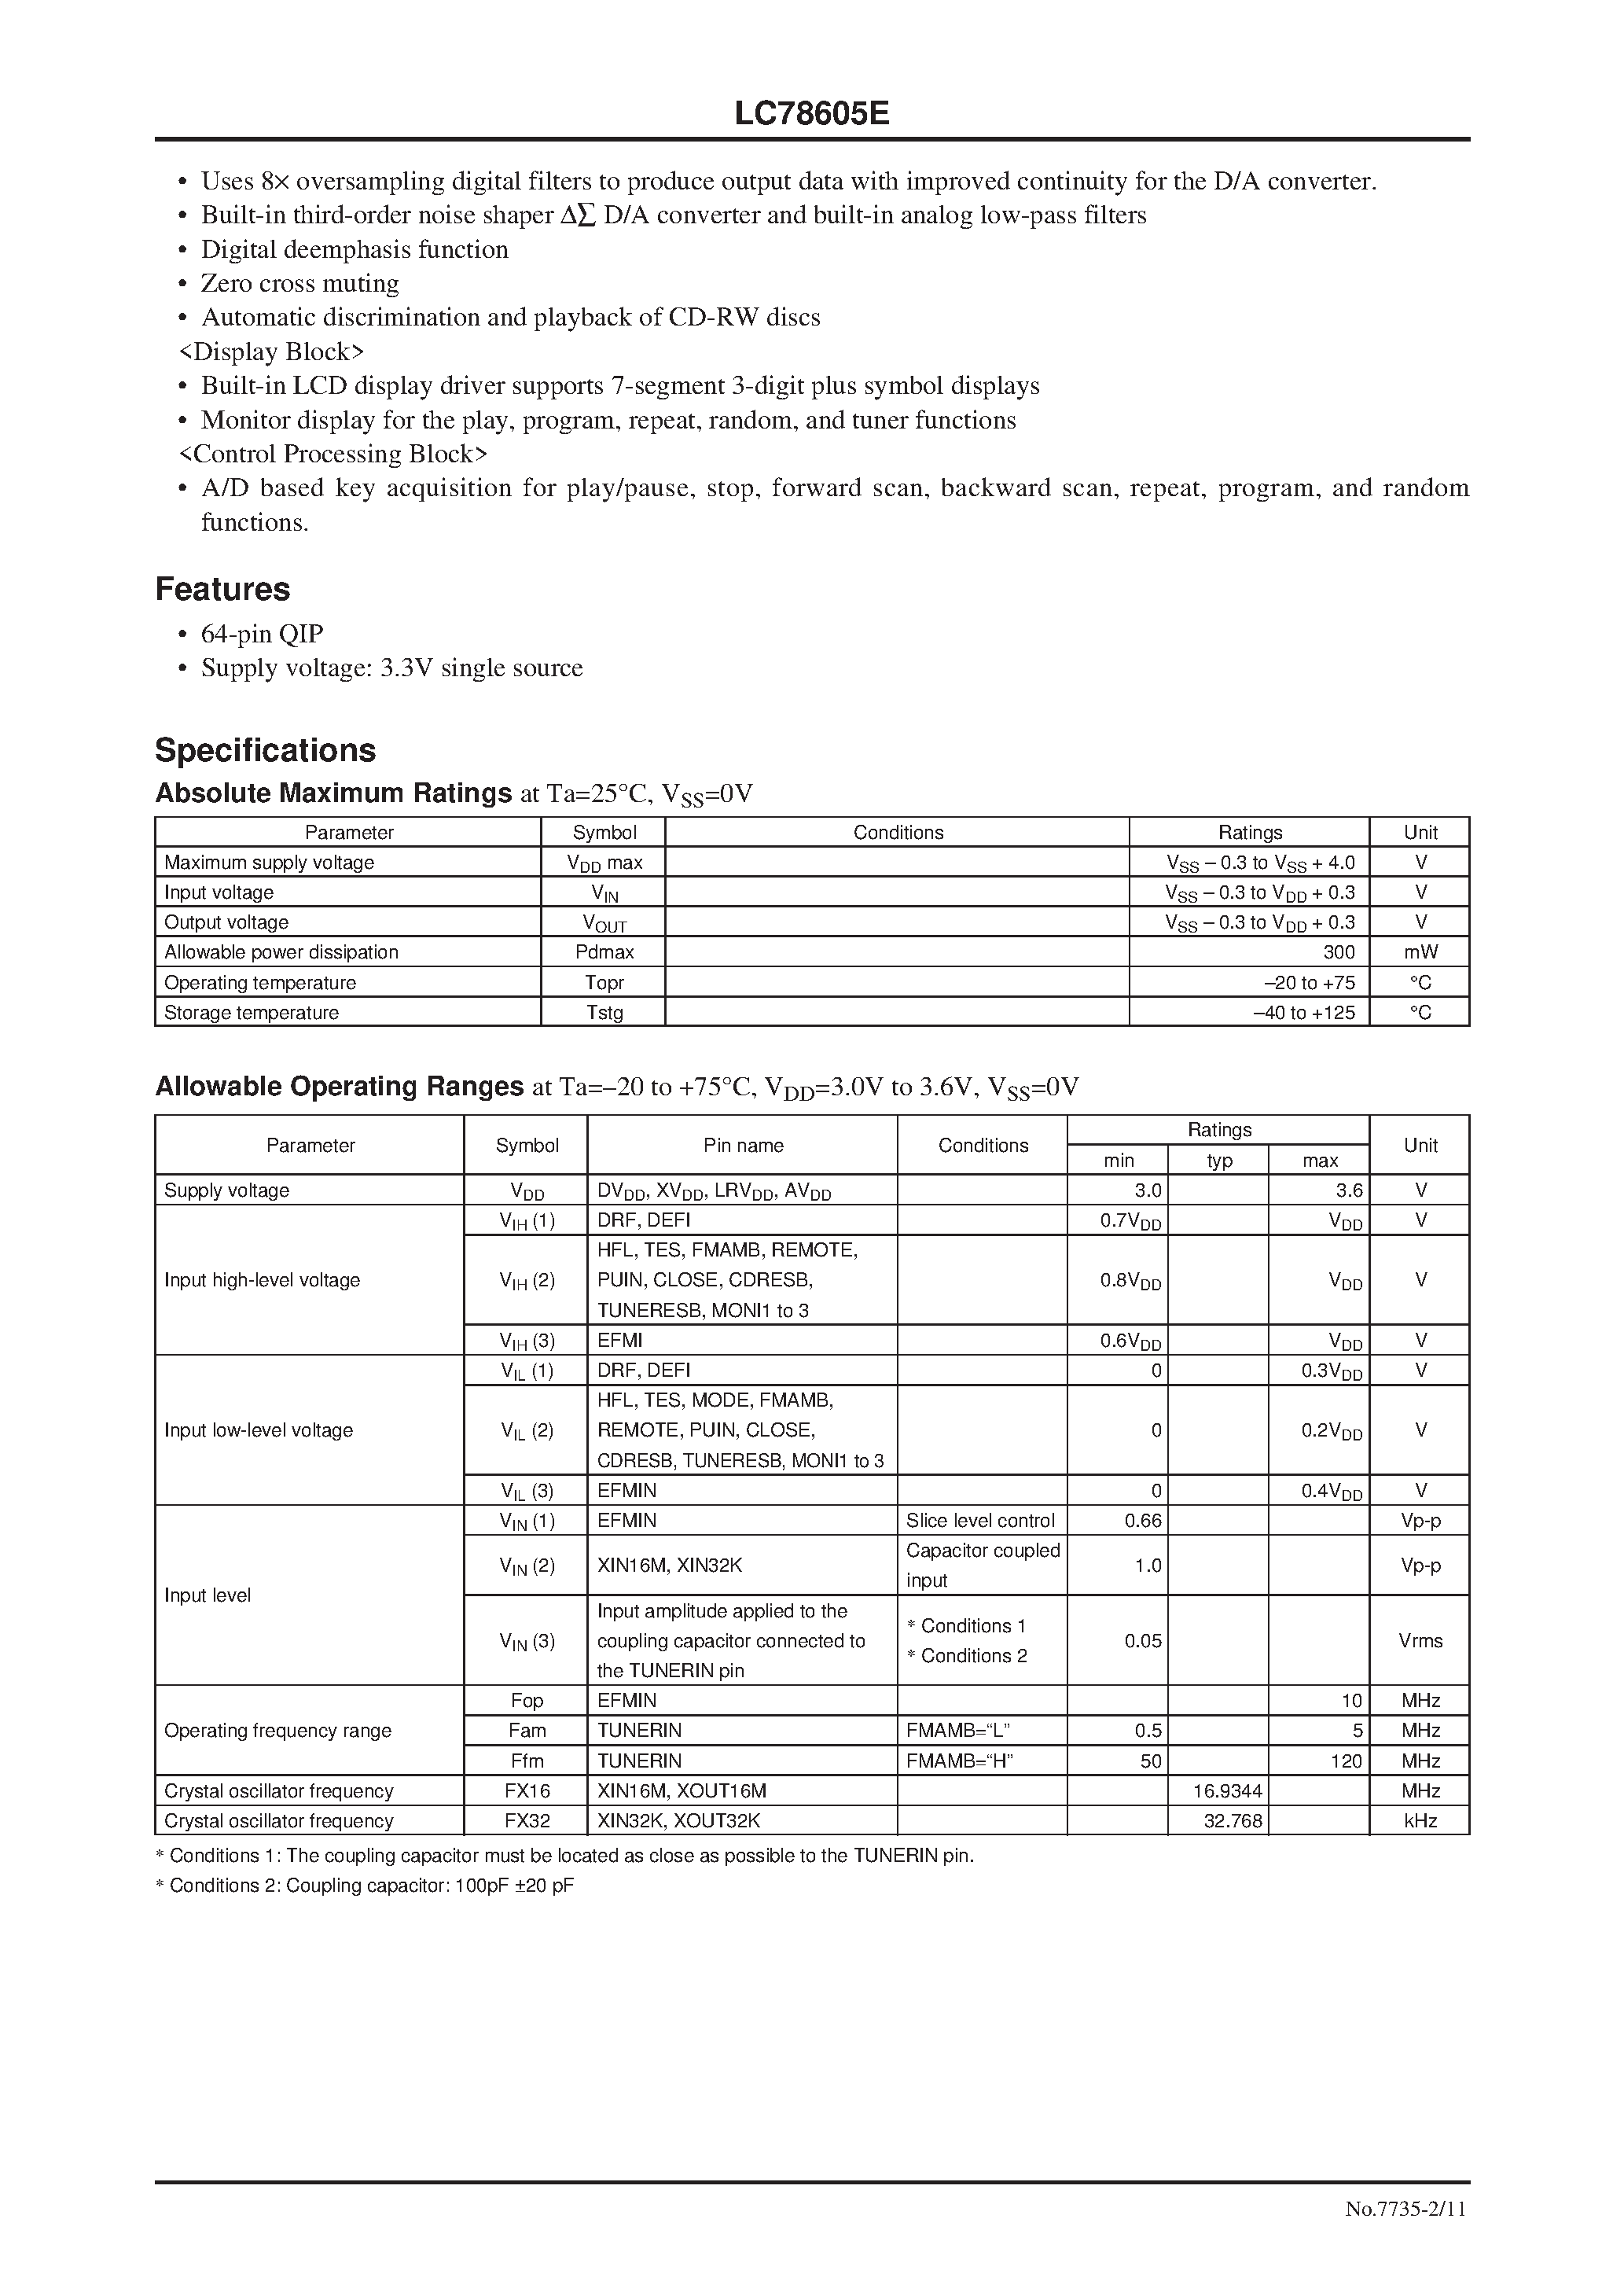 Datasheet LC78605E - Compact Disc Player DSP page 2